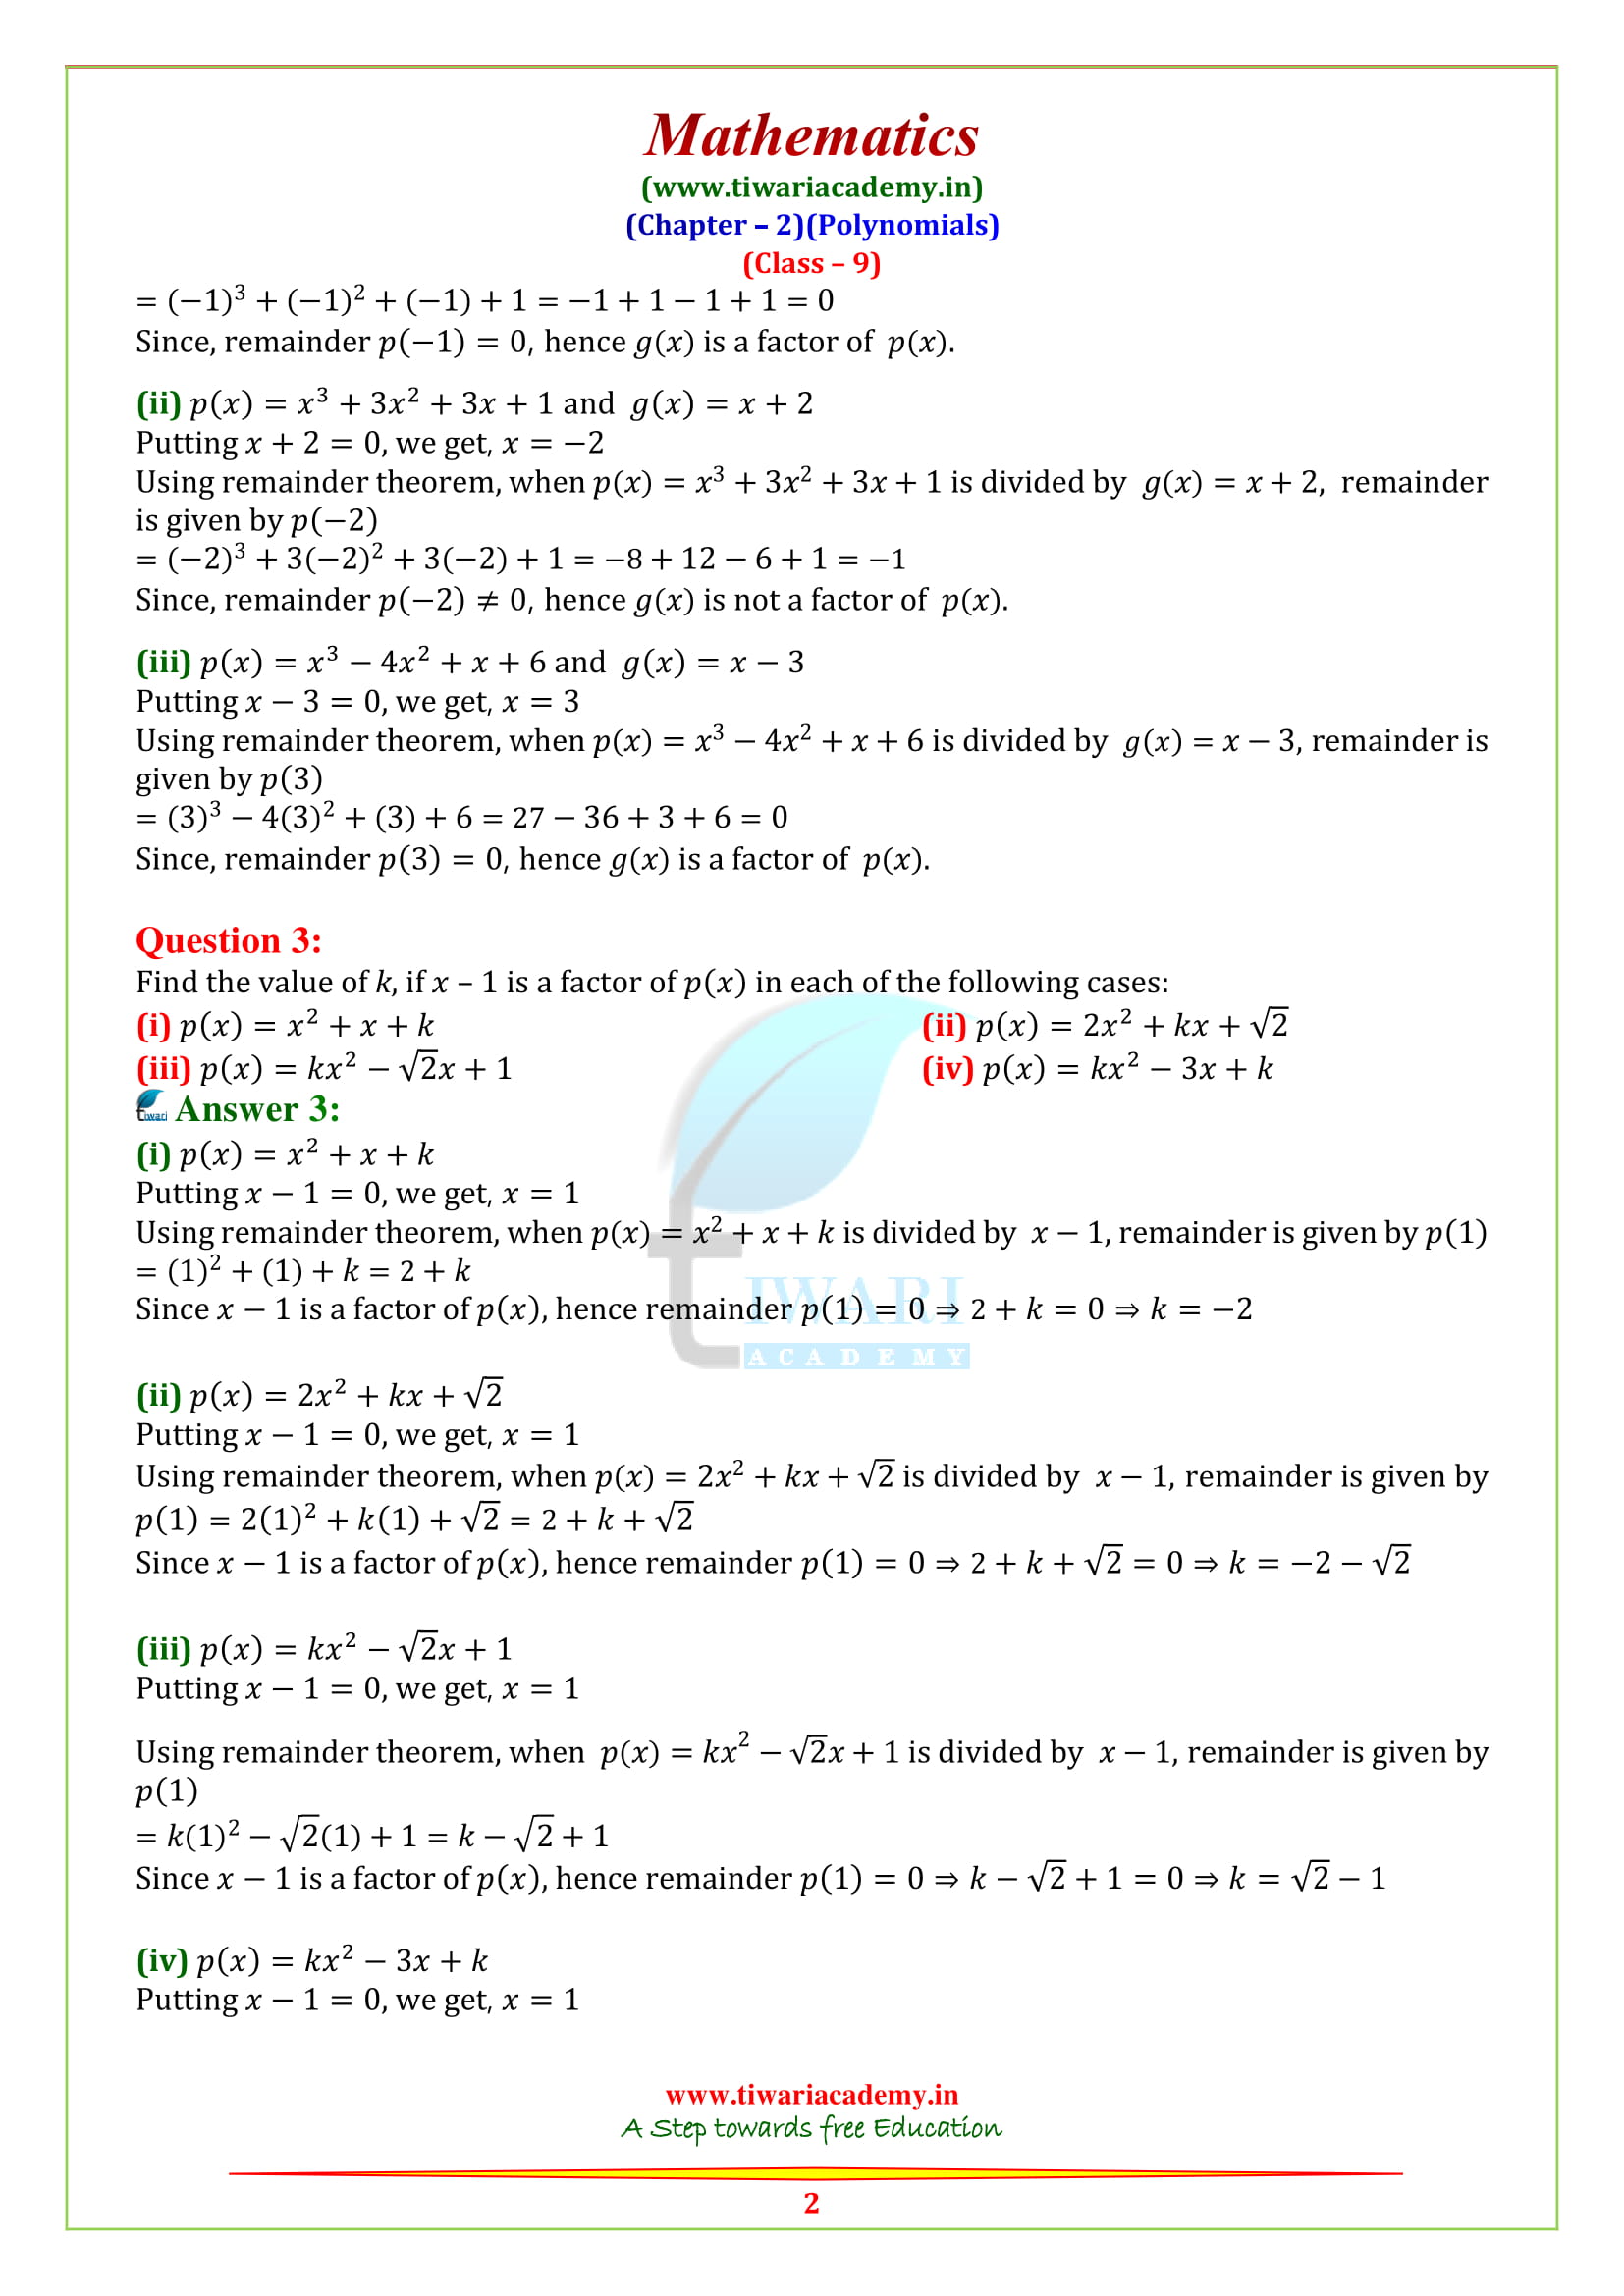 NCERT Solutions for class 9 Maths Chapter 2 Exercise 2.4 updated for mp, up cbse board